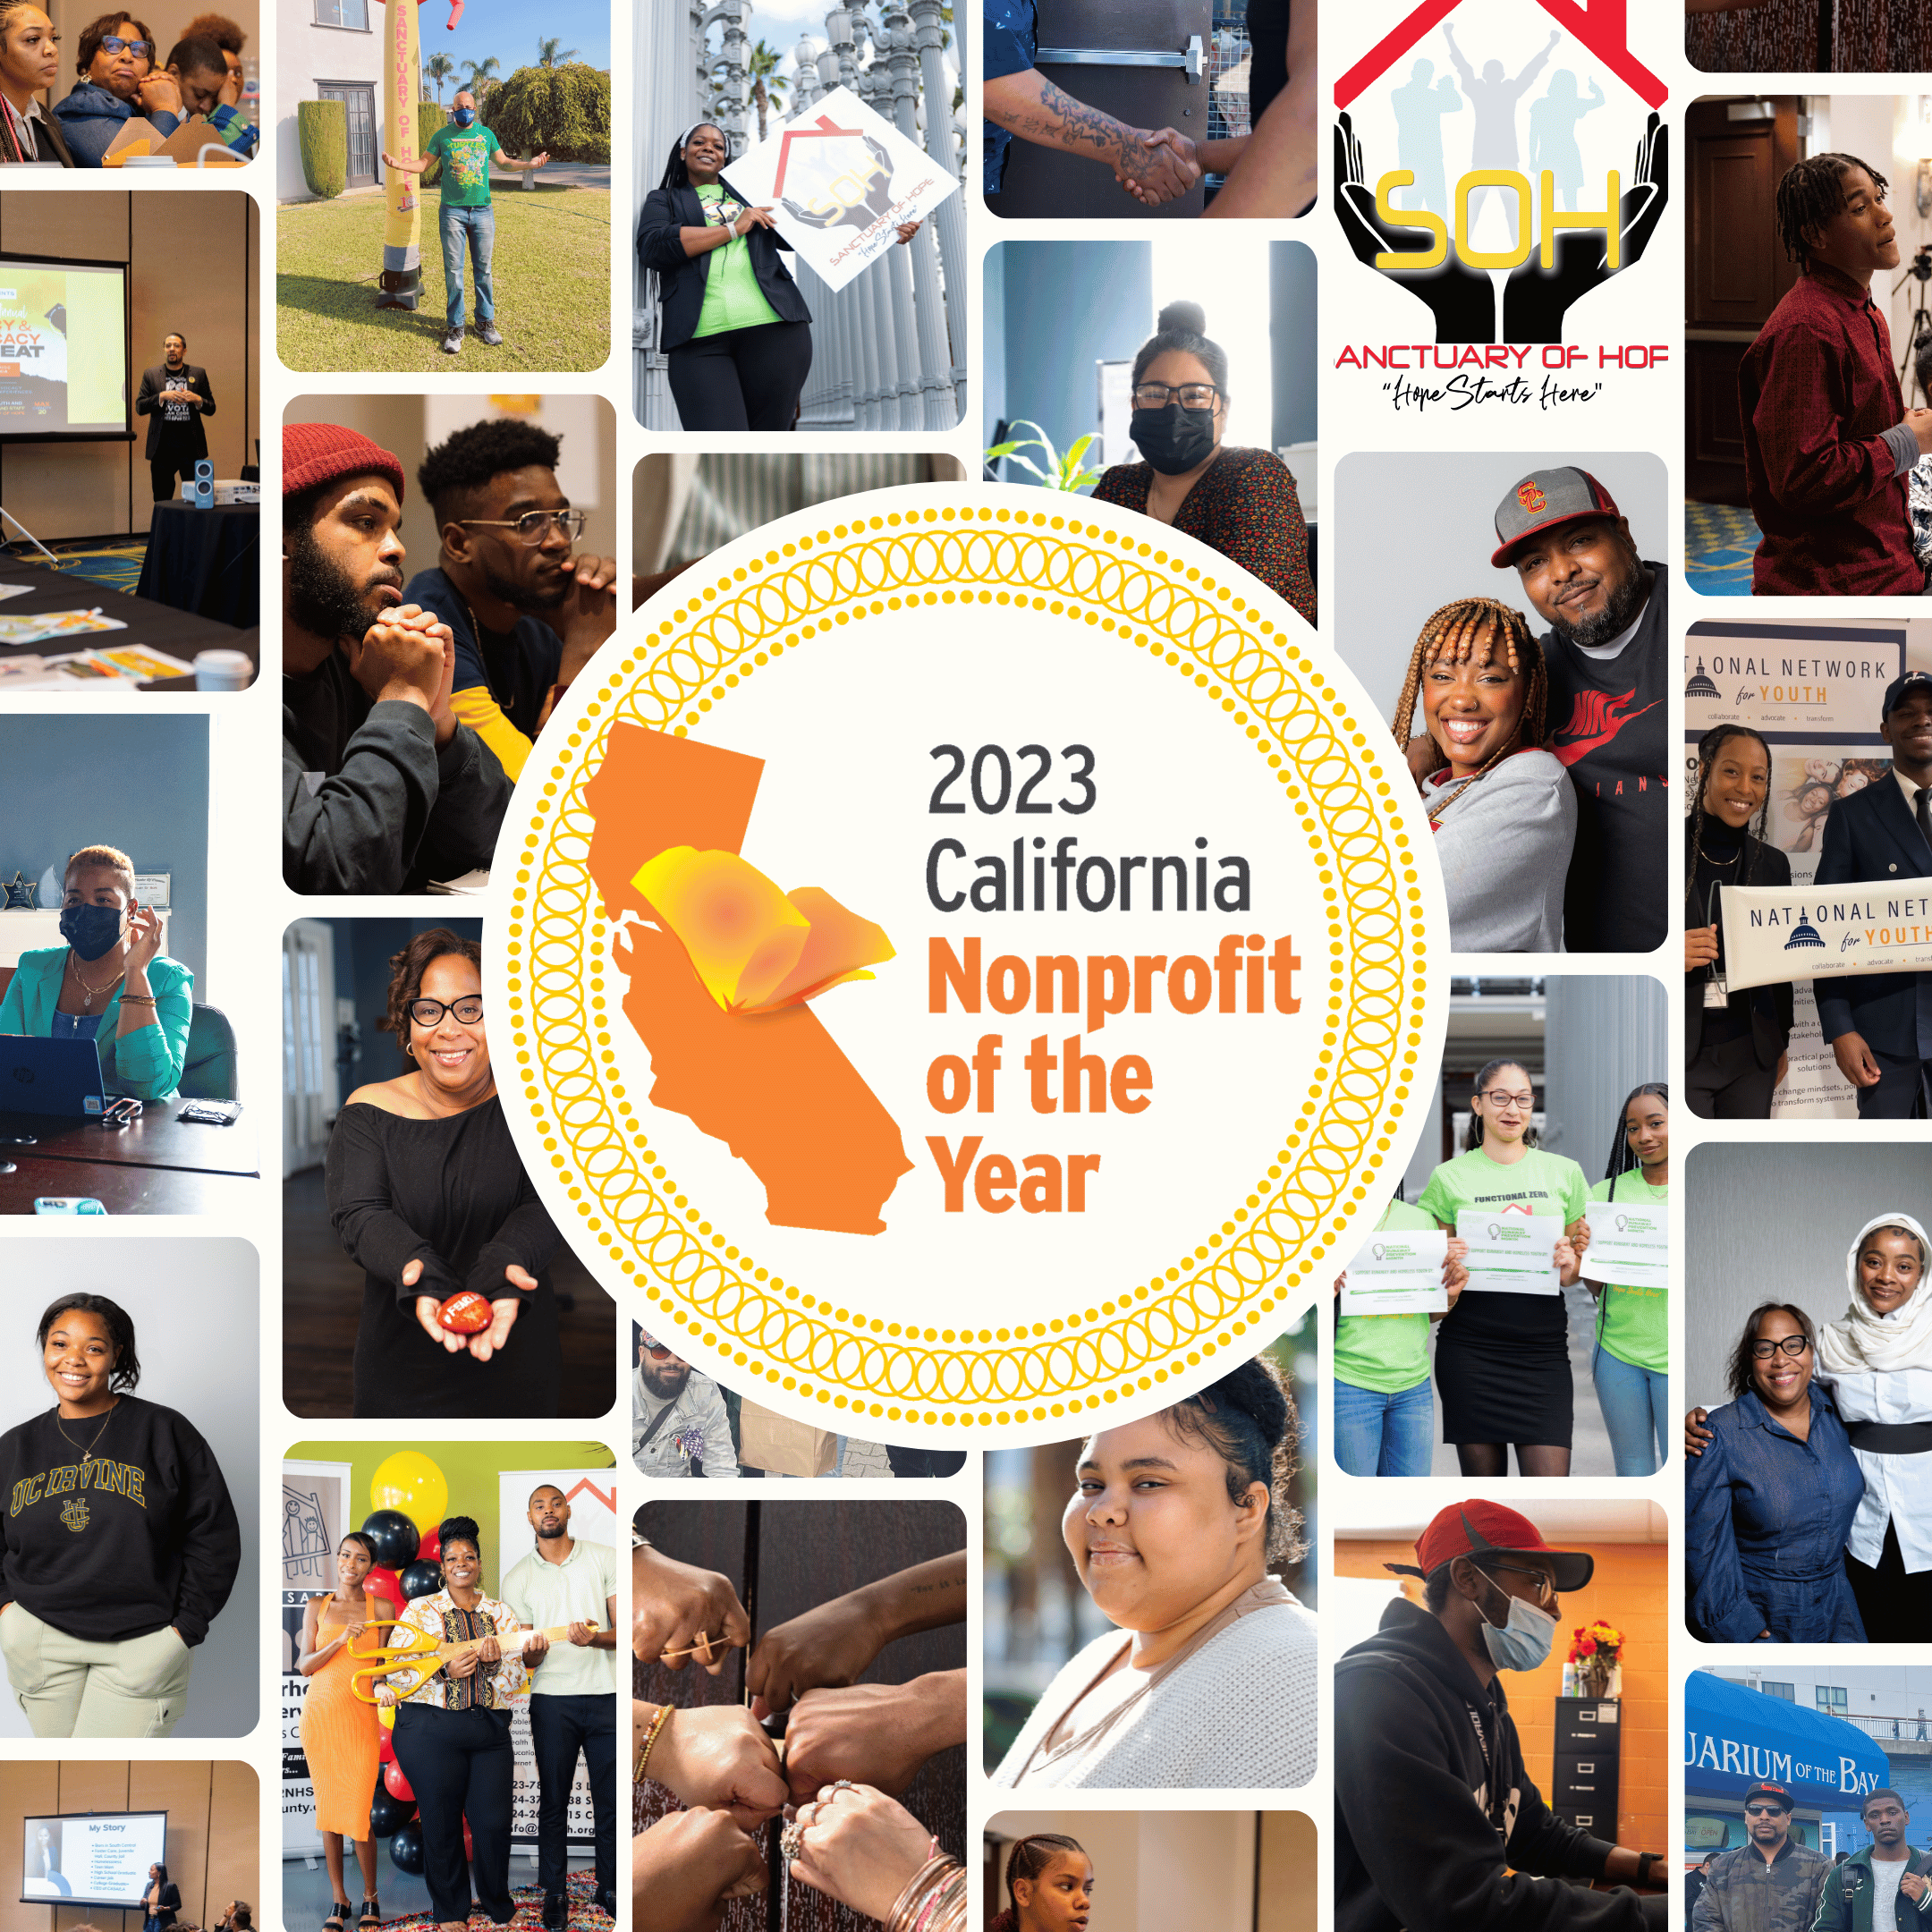 SANCTUARY OF HOPE CHOSEN AS A 2023 NONPROFIT OF THE YEAR BY ASSEMBLYMEMBER ISAAC G. BRYAN